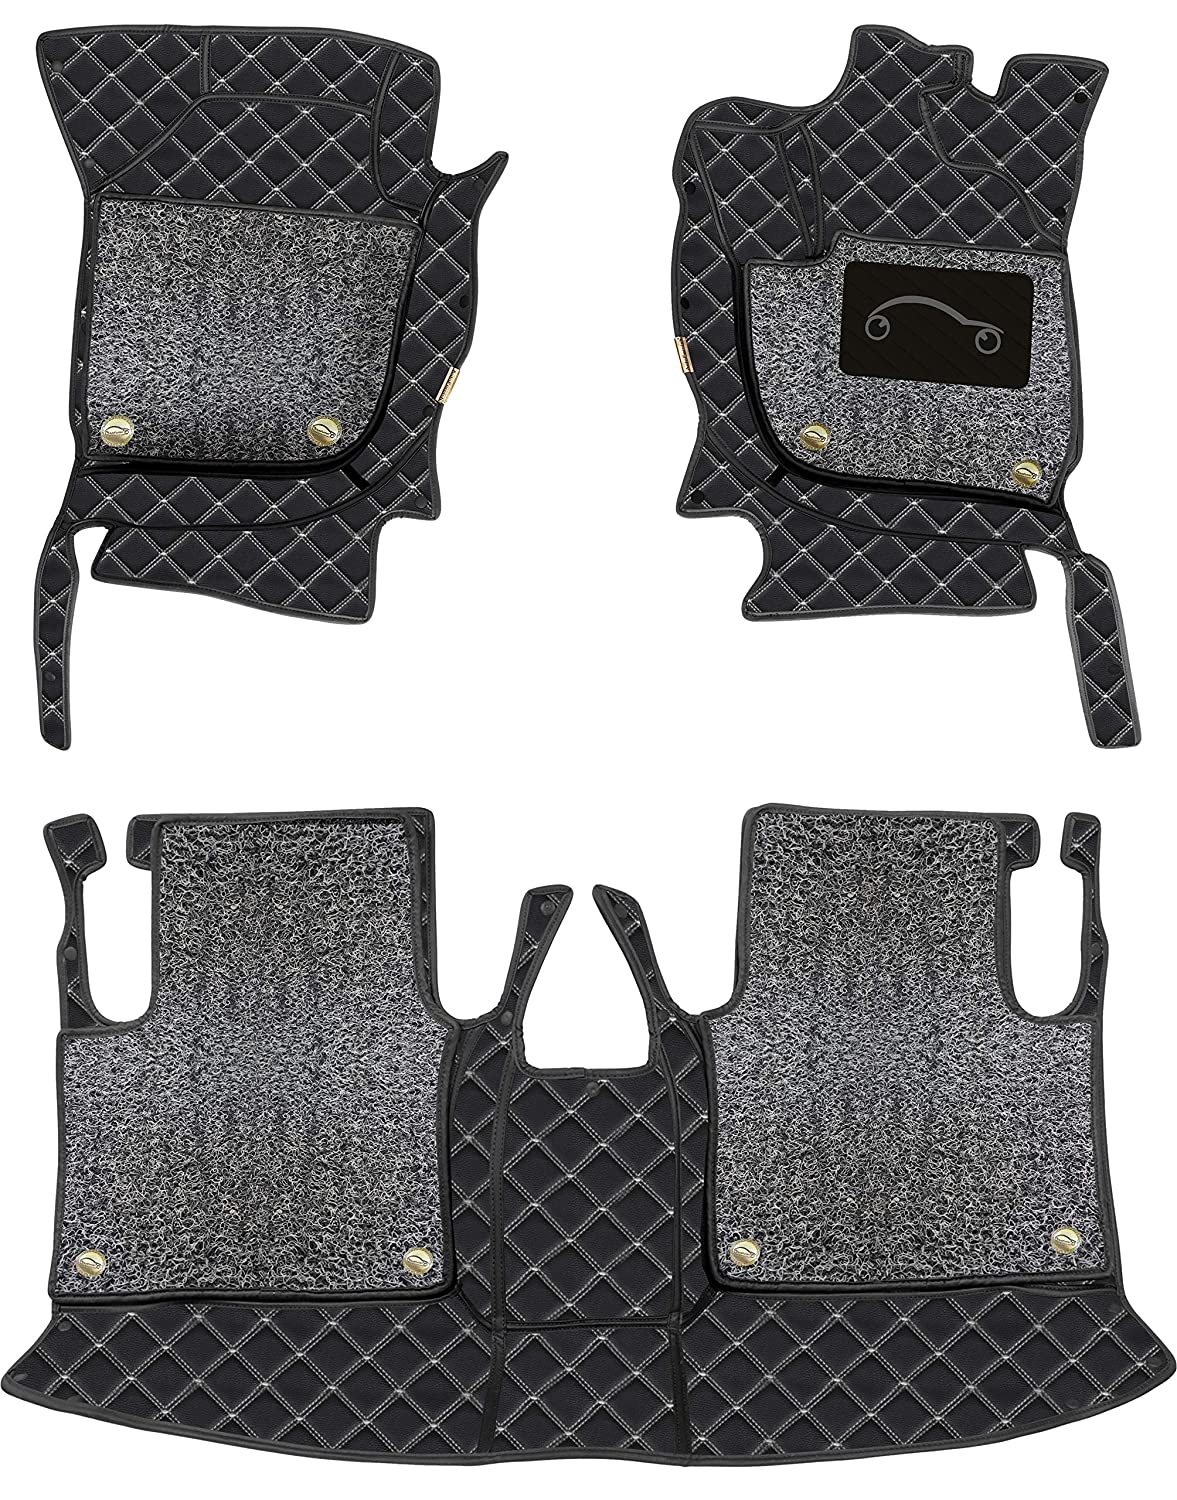 Renault Duster 2019 7D Luxury Car Mat, All Weather Proof, Anti-Skid, 100% Waterproof & Odorless with Unique Diamond Fish Design (24mm Luxury PU Leather, 2 Rows)